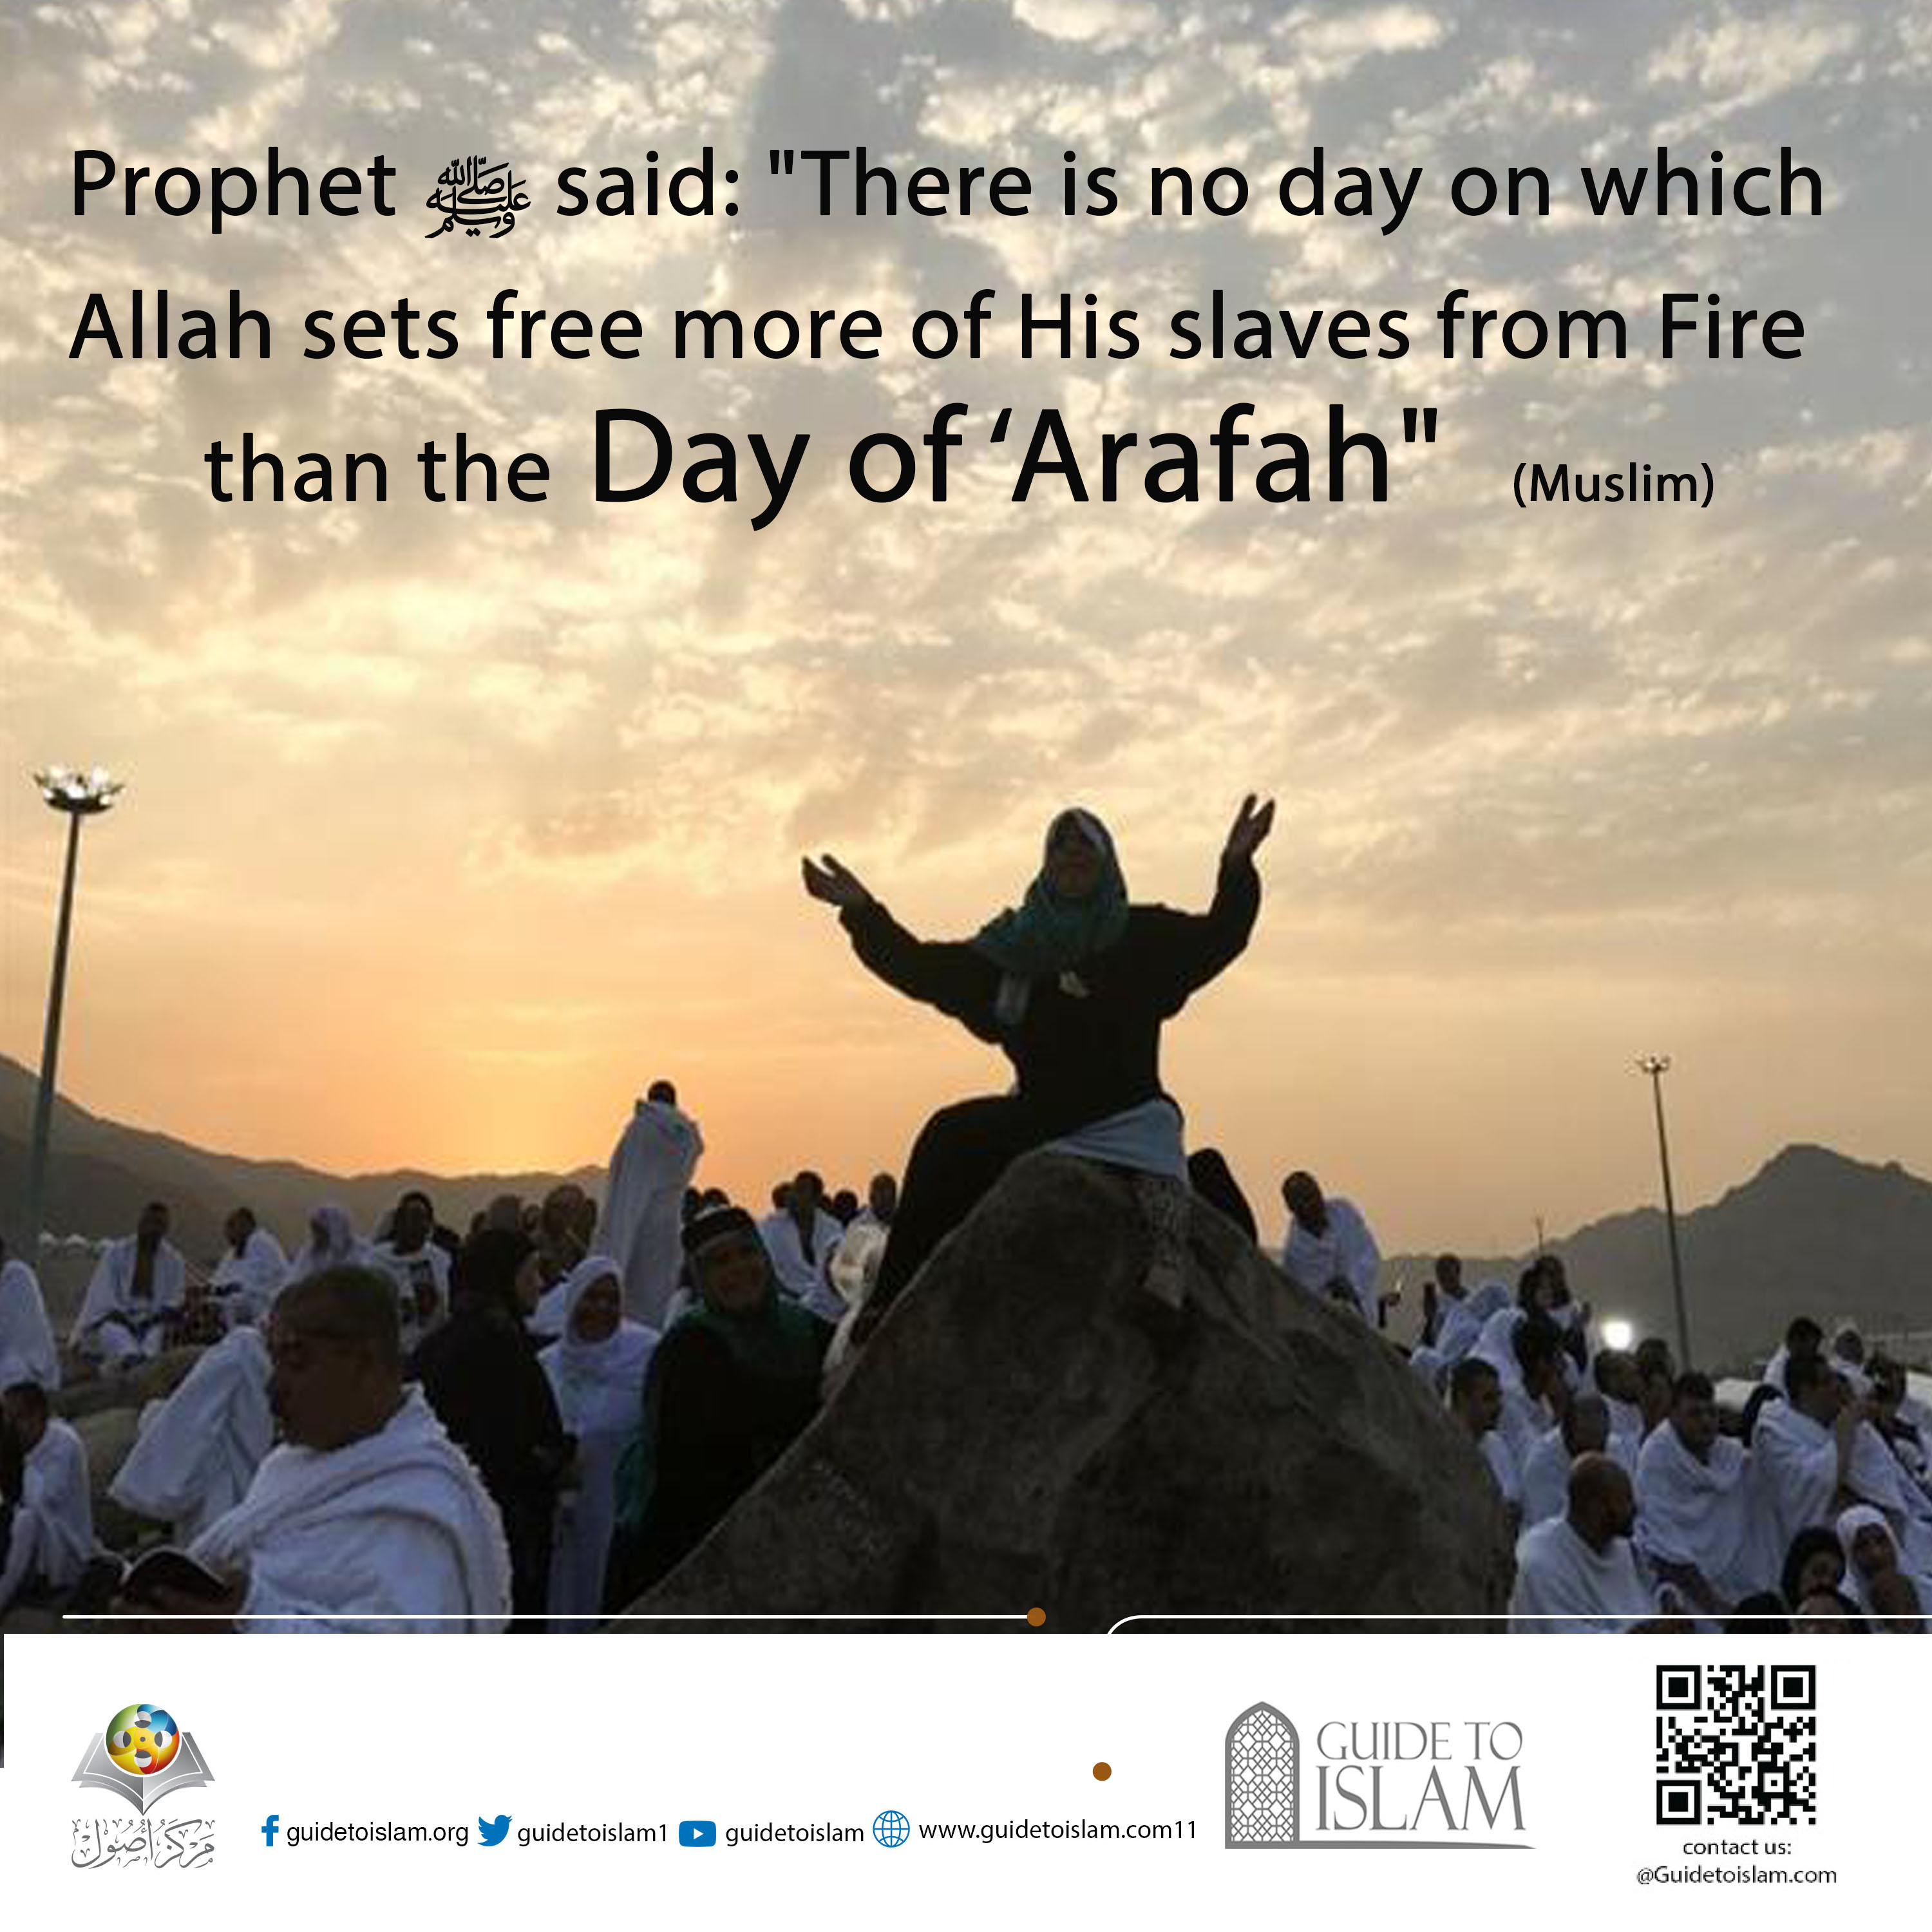 The Day of 'Arafah